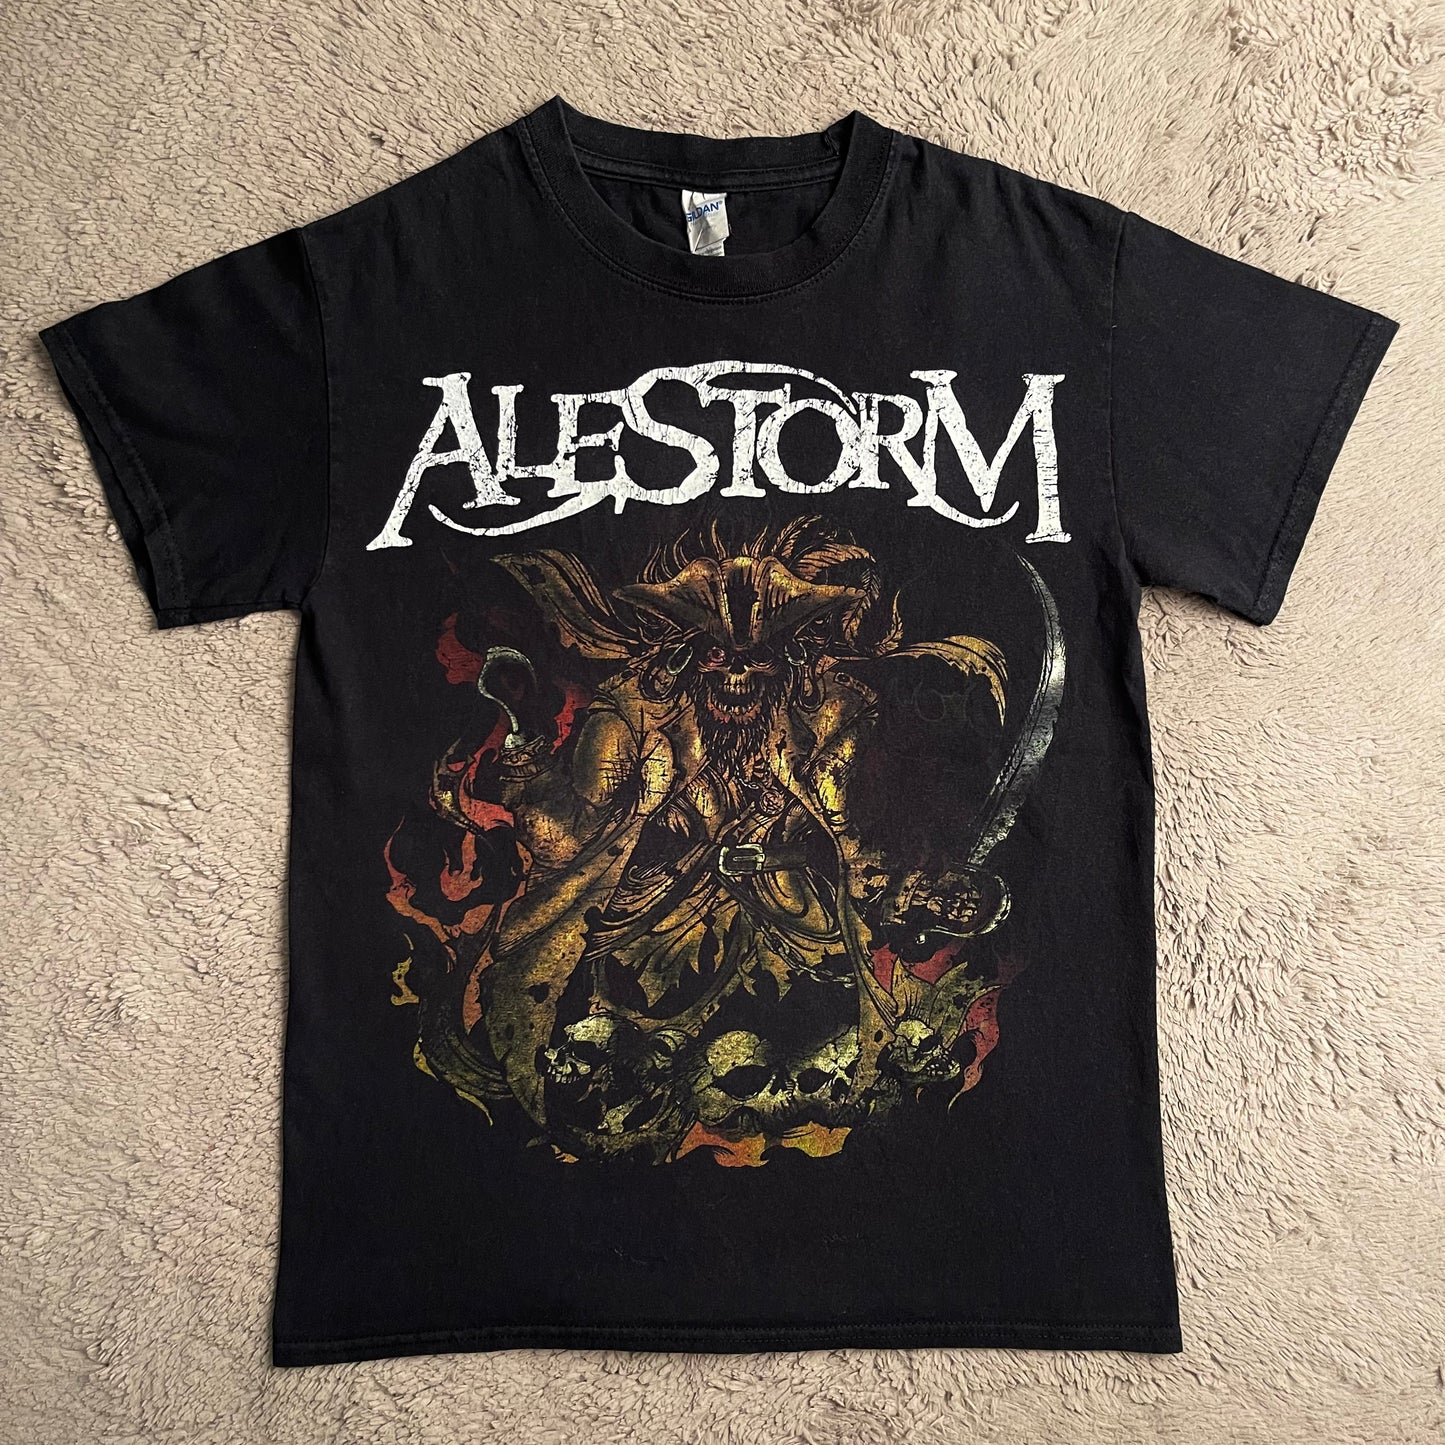 Alestorm 'We Are Here To Drink Your Beer!' Tee (S)